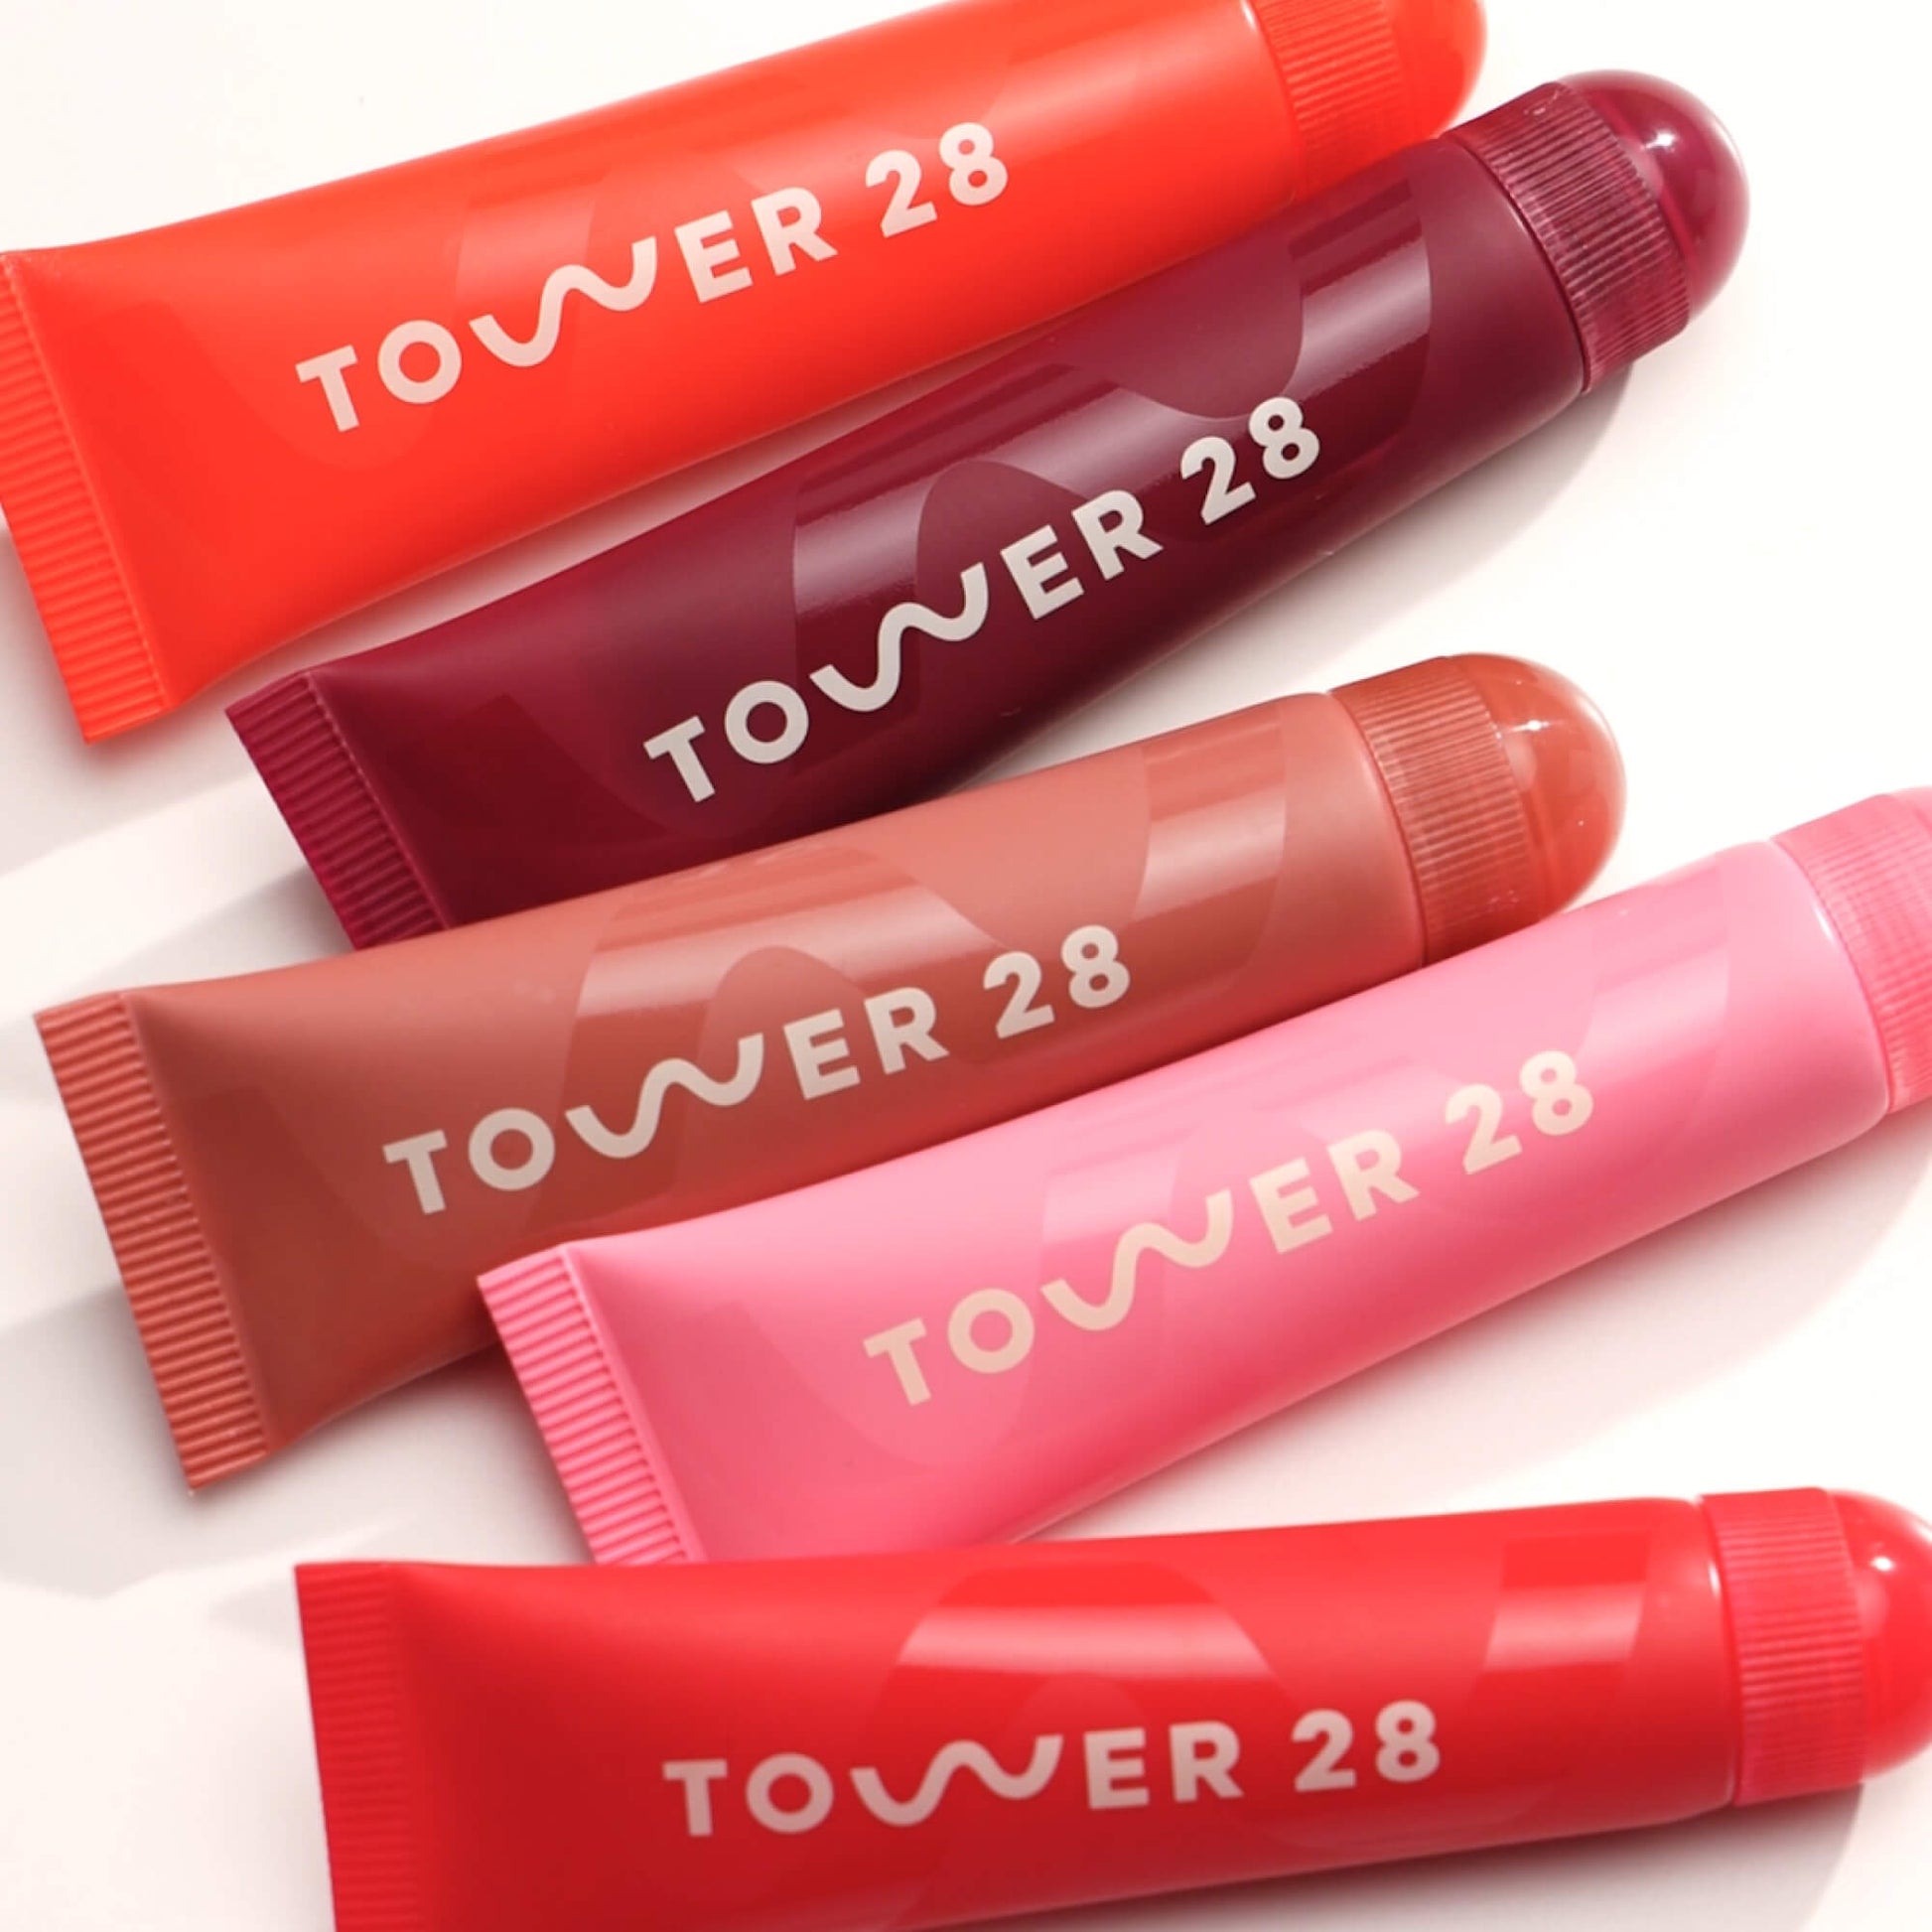 [Shared: Family group photo of the Tower 28 Beauty LipSoftie™ Lip Treatment on white